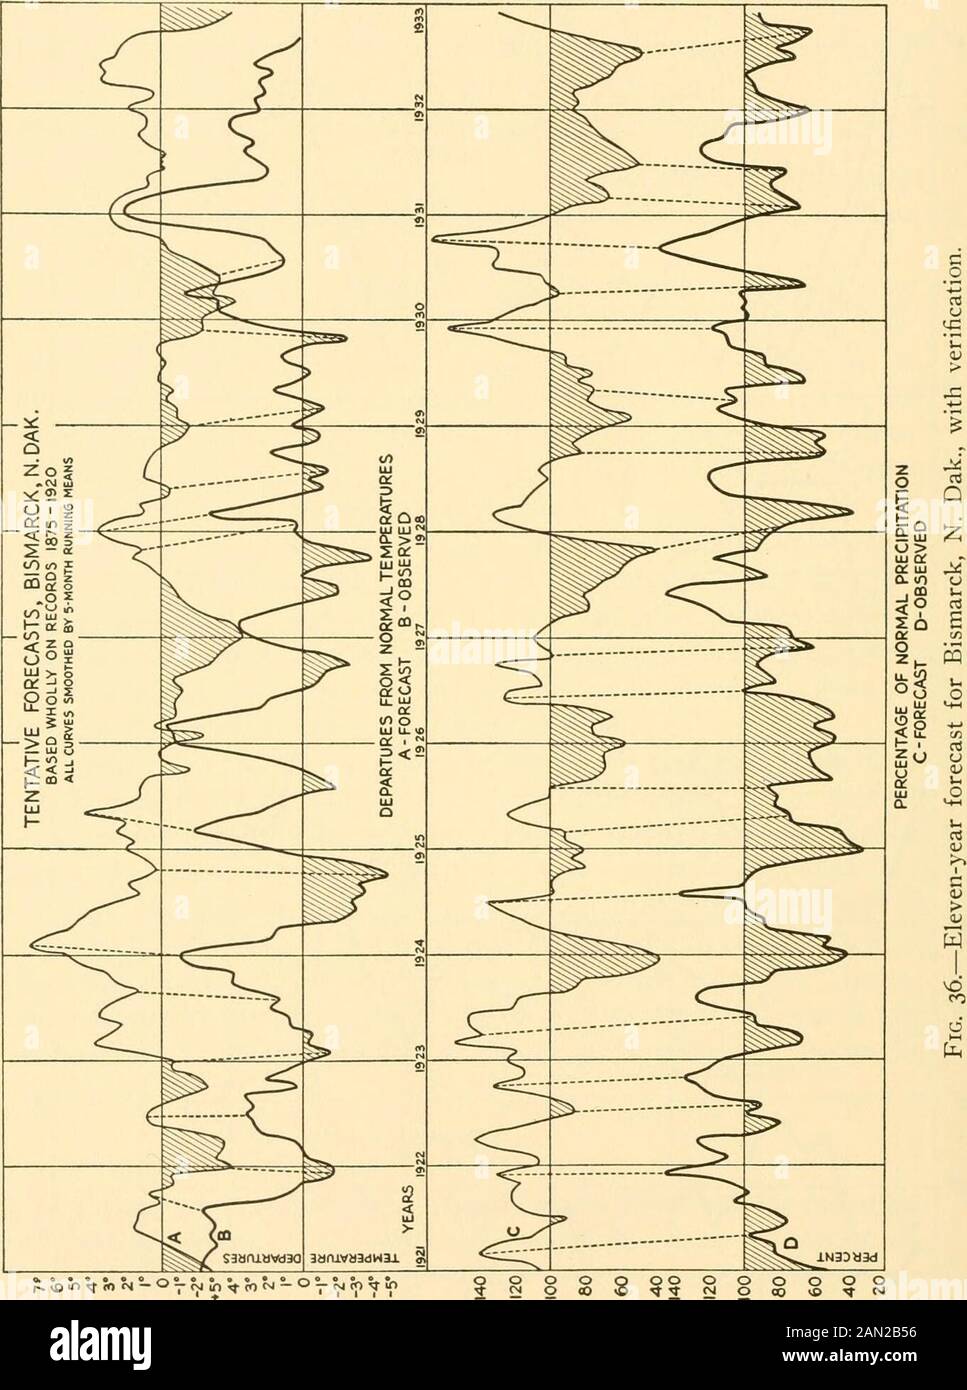 Smithsonian miscellaneous collections . nversions, or at least major changesin form, phase, or amplitude, have been disclosed in the periodicities Compare the general swing of curves 2 and 4 in figure 34. NO. lO SOLAR RADIATION AND WEATHER STUDIES ABBOT 8l JAN, MAY SEPT. JAN. MAY JAN. MAY SEPT. JAN. MAY 8°6° AV ^ A fV   HELEN/ , MONT CHICAG 0, ILL.^4 4°2°0°2°  1AT1,0. 1 -*U  V^ /// 1  1 A /  CHARLESTON,S.C. / «t B 1 / W- / B A -2° A ^ / t1 VP  /x r 1 A 1 4° / GALVESTON,TEX. 4 A  /^ 1 ,, 0° k ^ SALT L/UTA KE, /H /  --y  x^    ^ , &gt;,y Al / // -N -24°  7 LITTLE ROCK , A RK. Stock Photo